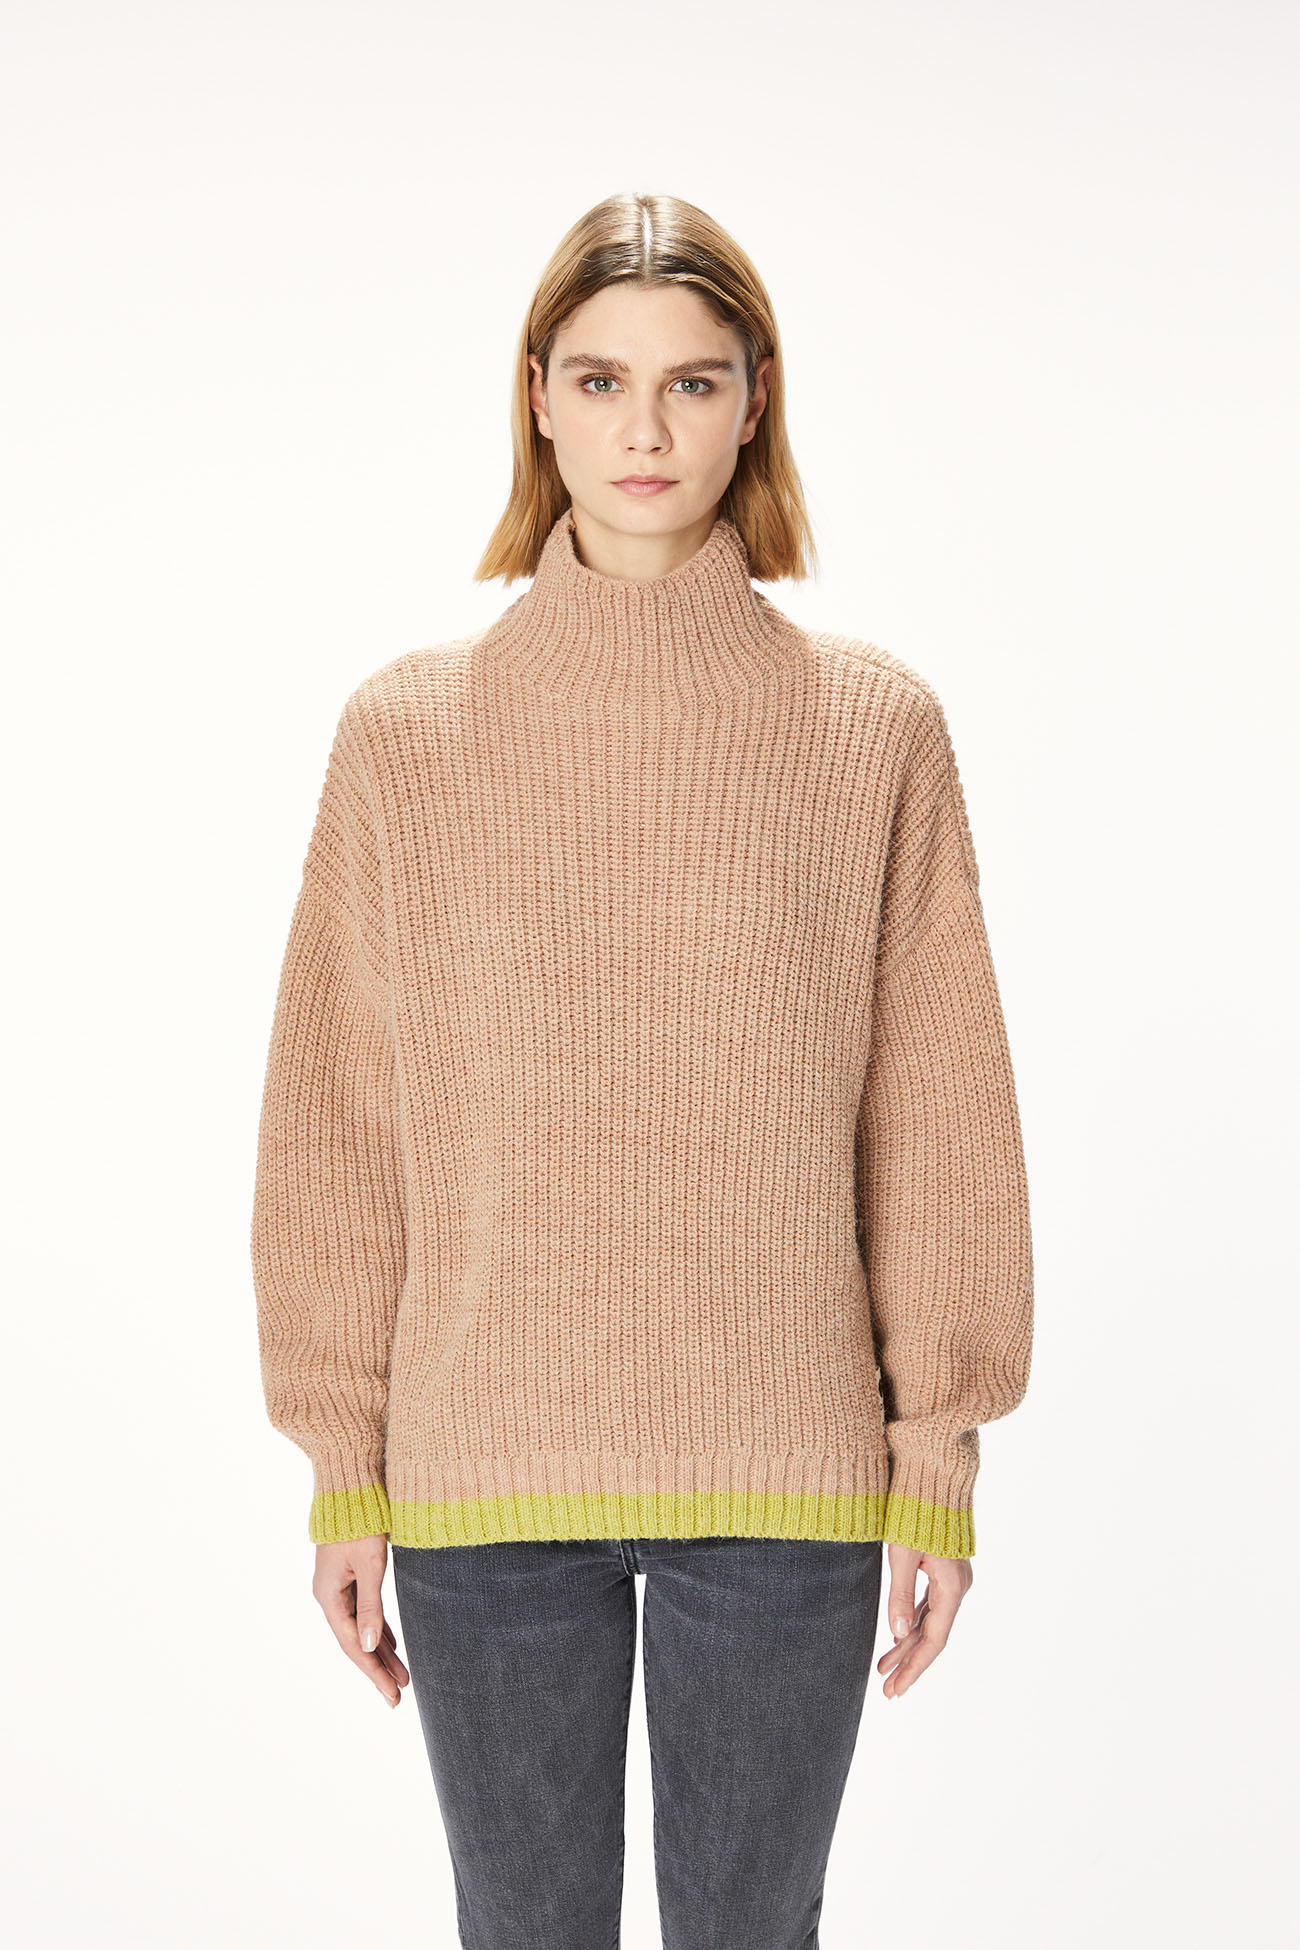 SWEATER 4043 MADE IN PLAIN KNITTED WOOL - BLUSH ROSE - OOF WEAR